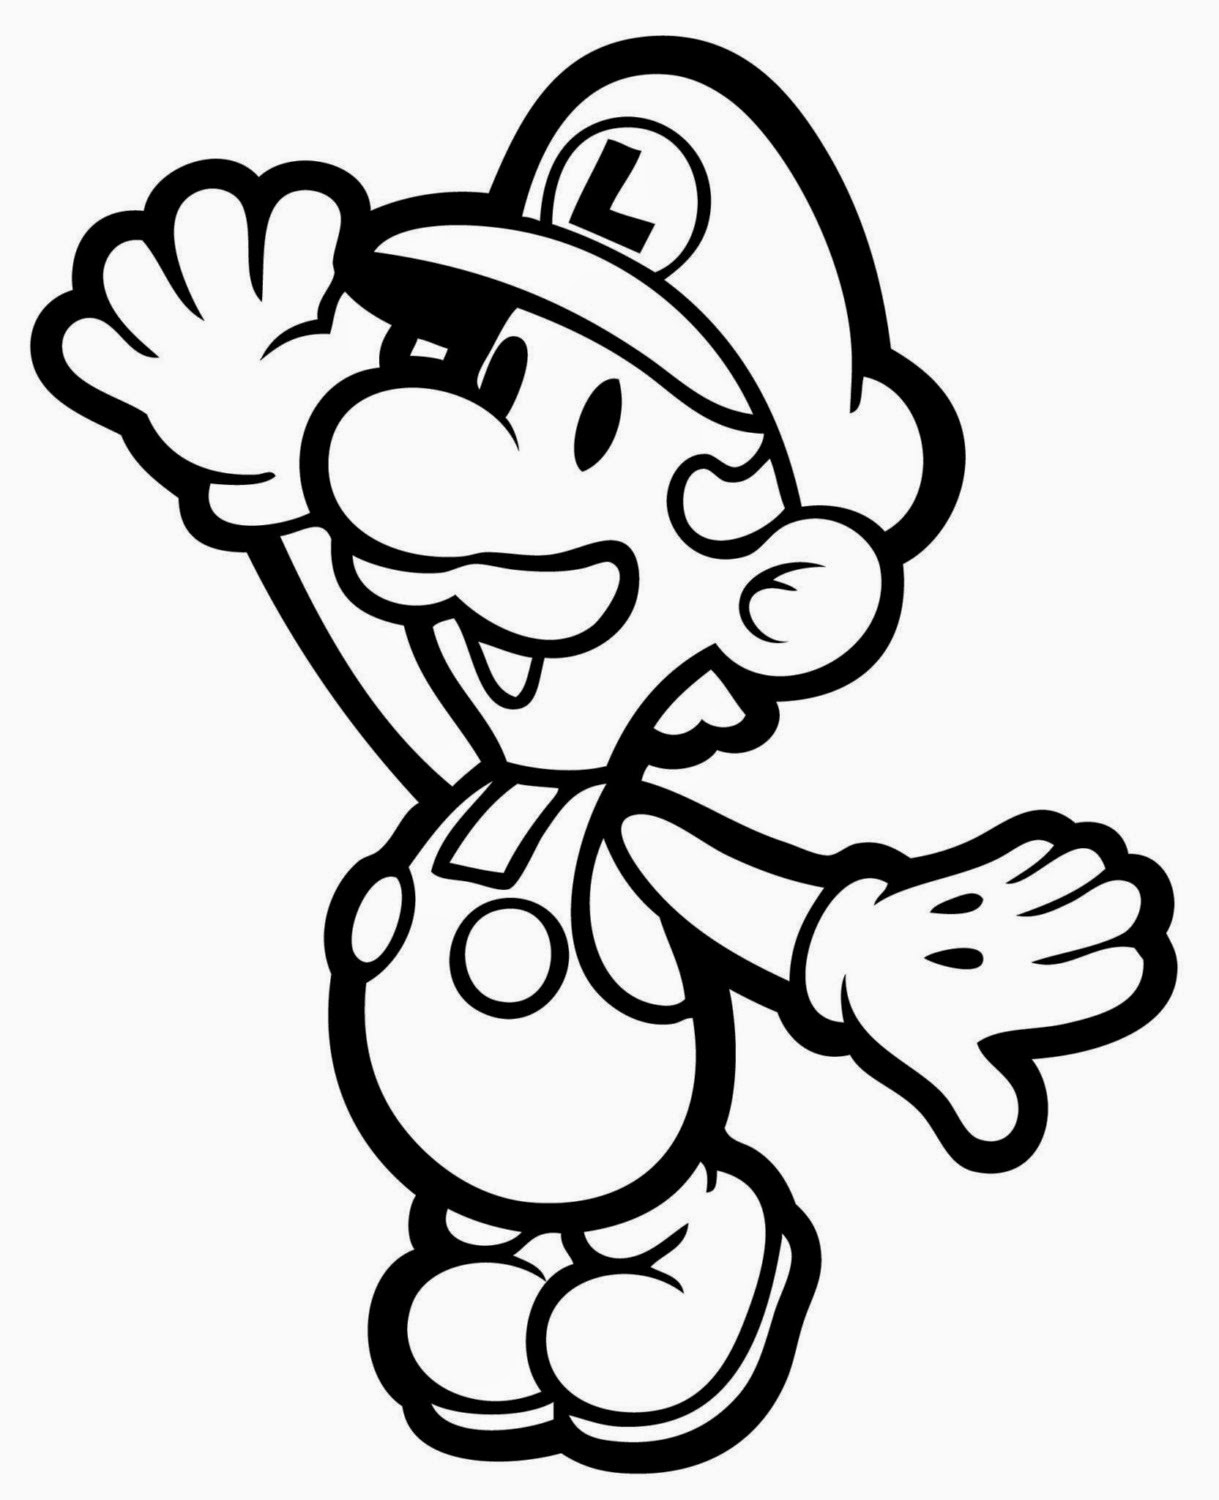 Coloring Pages Mario Coloring Pages Free and Printable